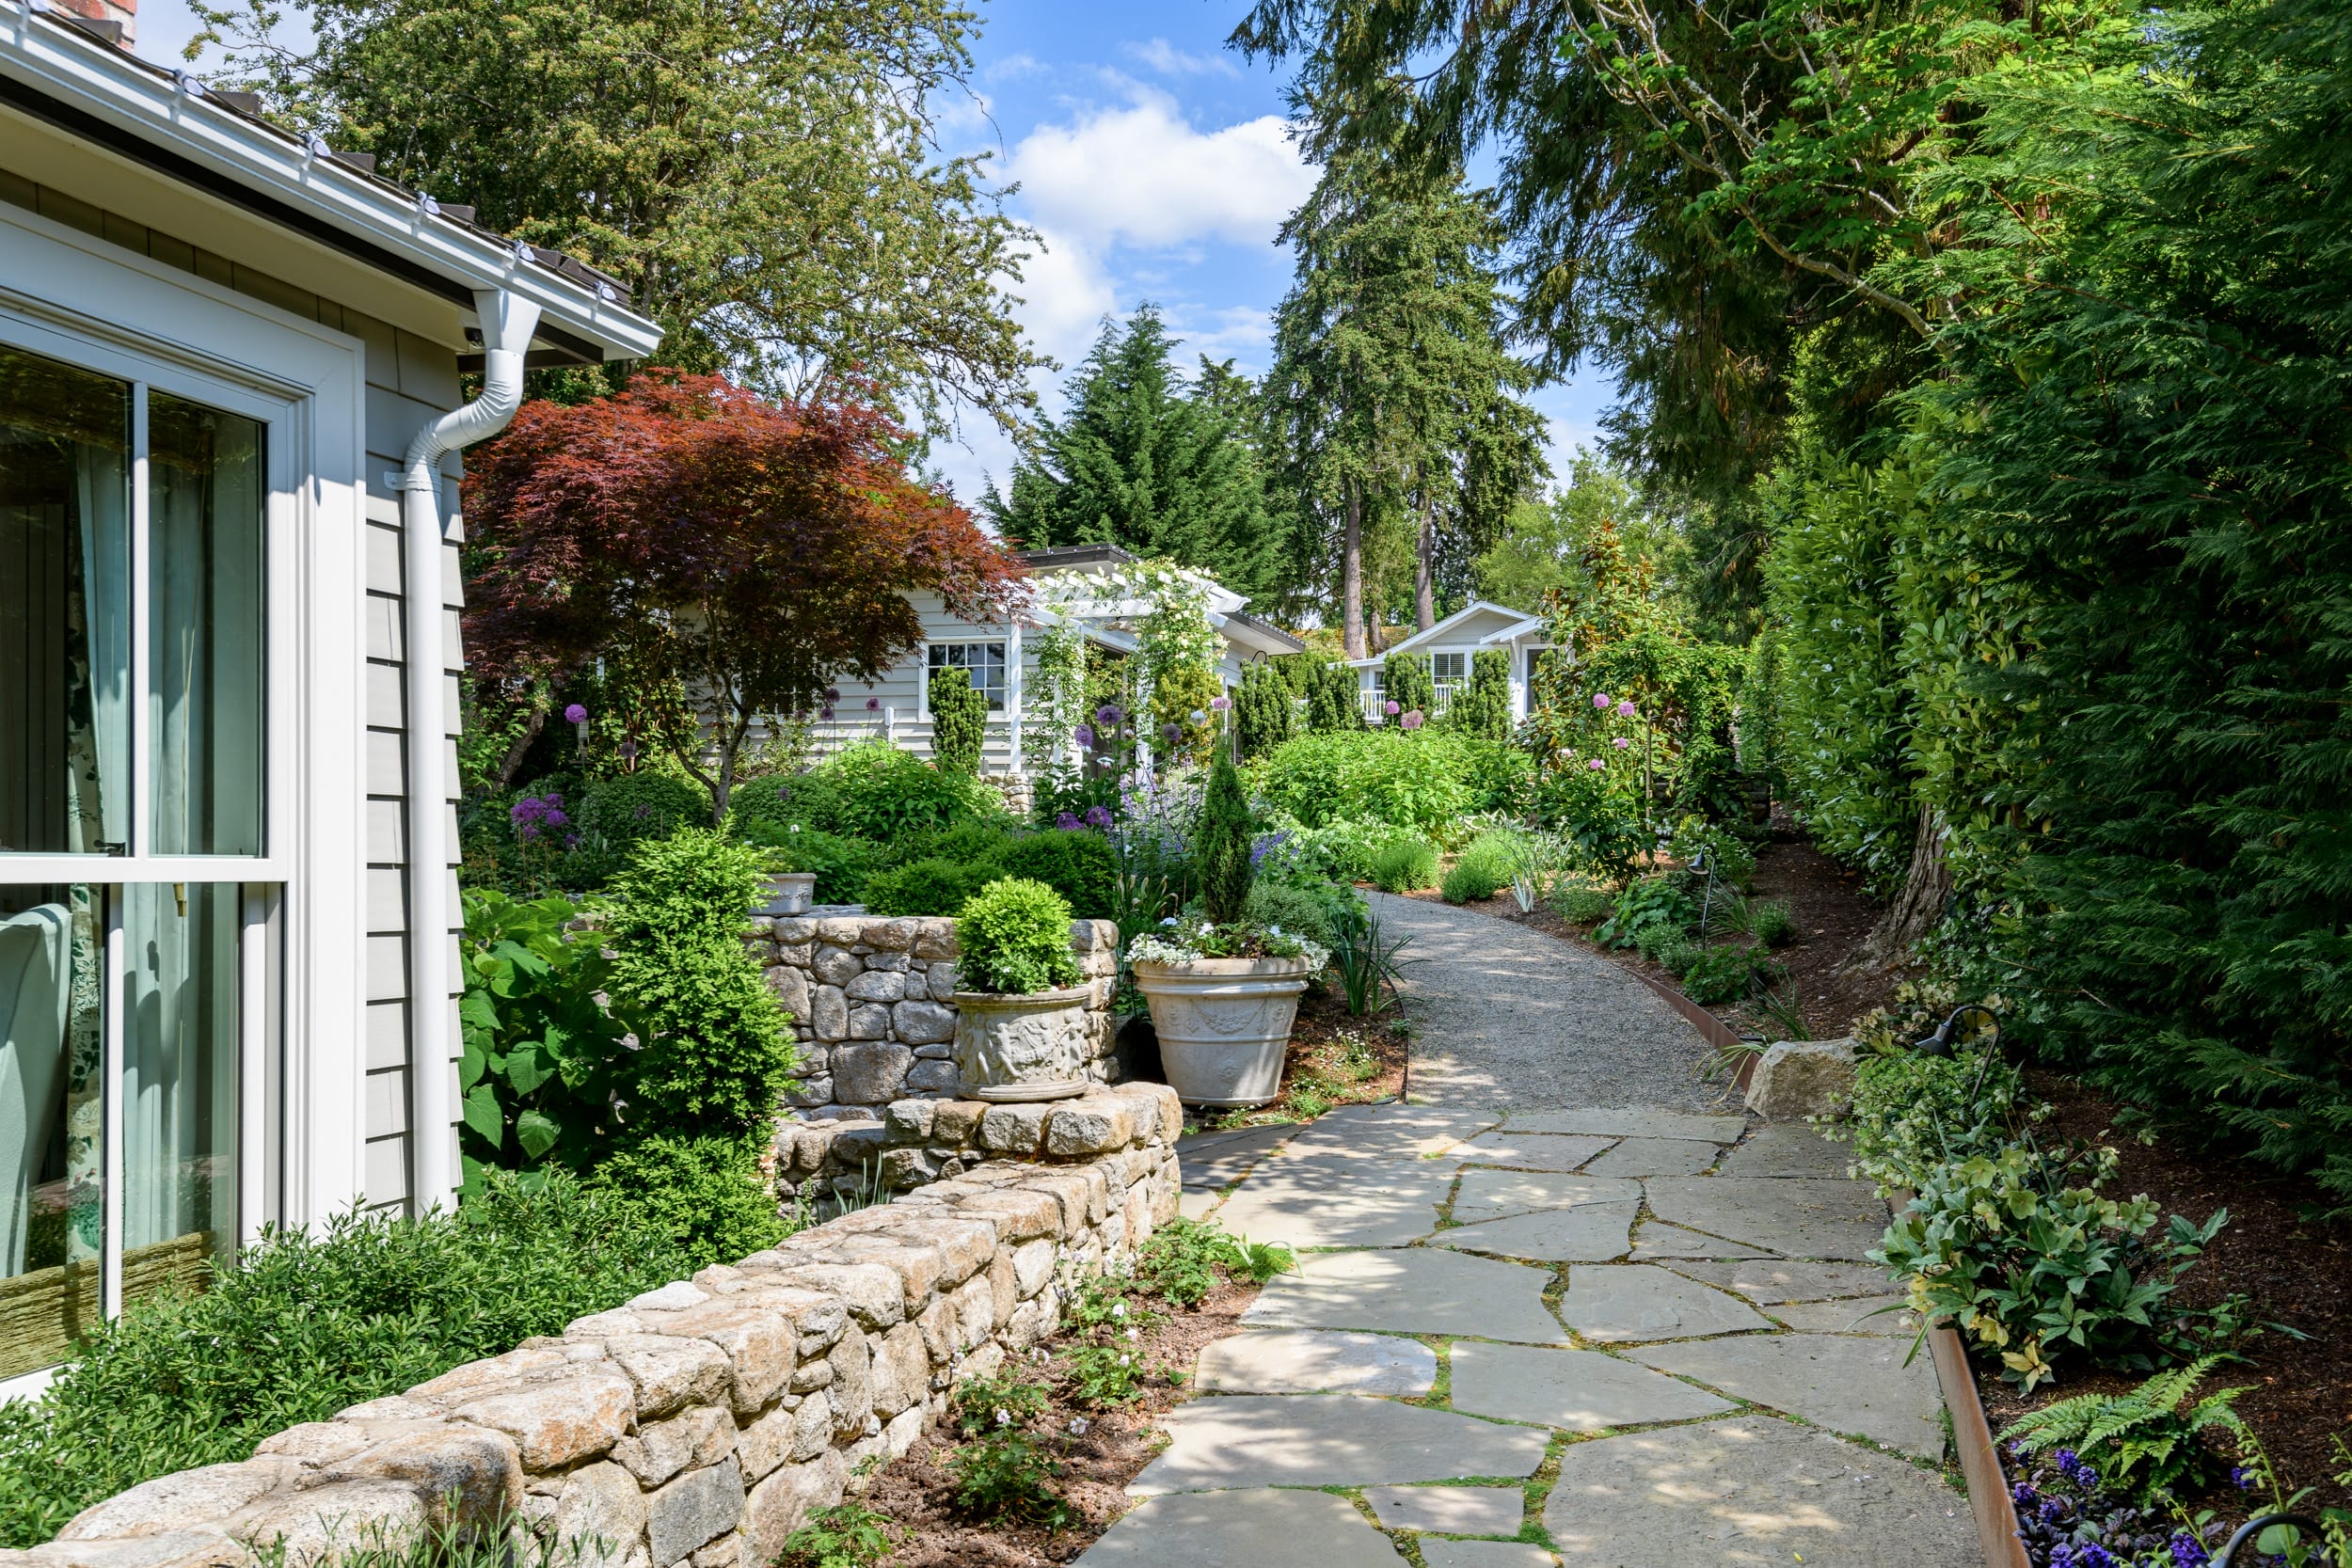 A stone walkway leads to a garden.